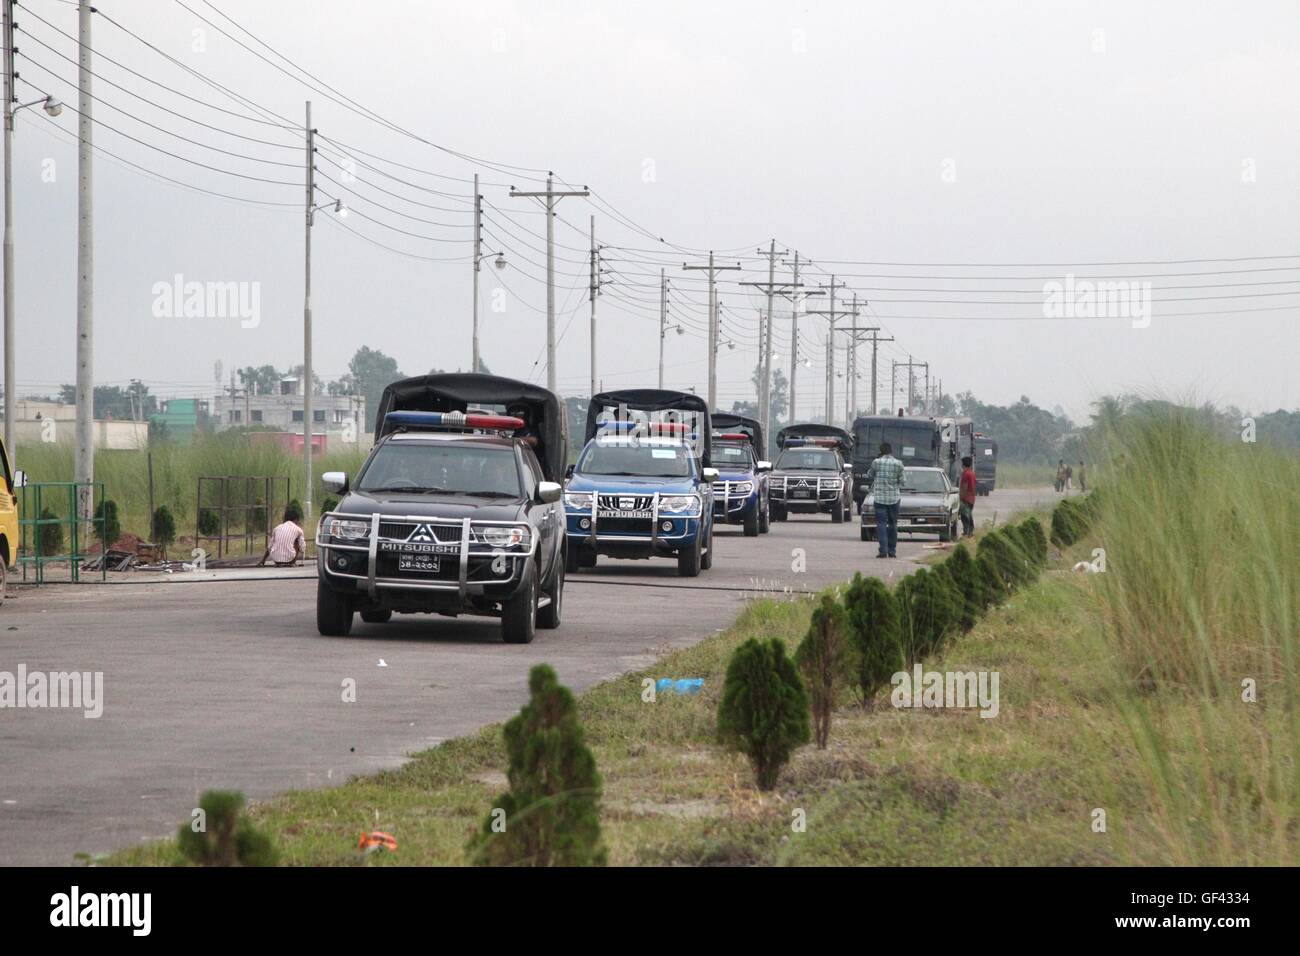 Dhaka, Keranigonj, California, Bangladesh. 29th July, 2016. A police car escort the prisons van during the shifting of prisoners as the shifting of prisoners from the 200-year-old Dhaka Central Jail to the newly built prison at Rajendrapur, in Keraniganj, has started on 29 July, 2016, Dhaka, Bangladesh. The new prison at Rajendrapur is located 12 kilometres away from the old one built in 1788 on Nazim Uddin Road. According to the local media report Prison authorities say the Dhaka Central Jail housed nearly 8,000 prisoners, 6,300 of them male, and the rest female inmates. The women prisone Stock Photo